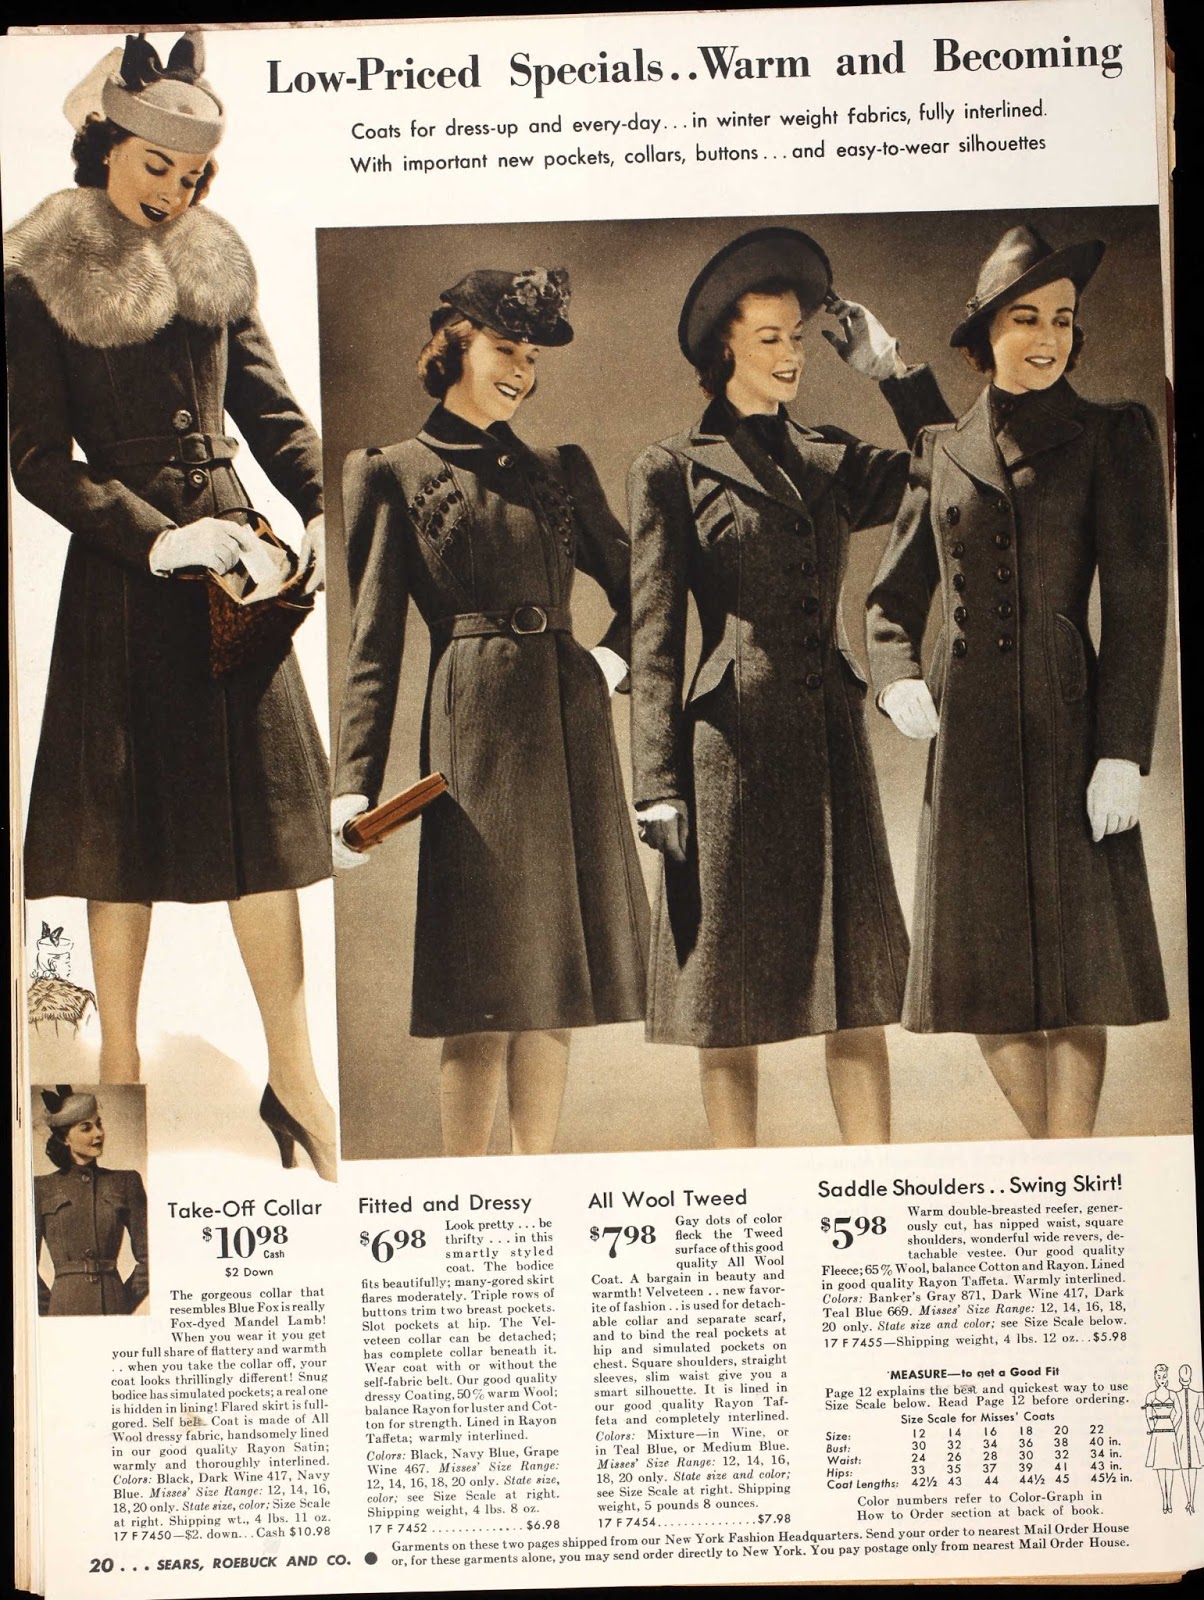 Ruffles In The Front: The Year 1940